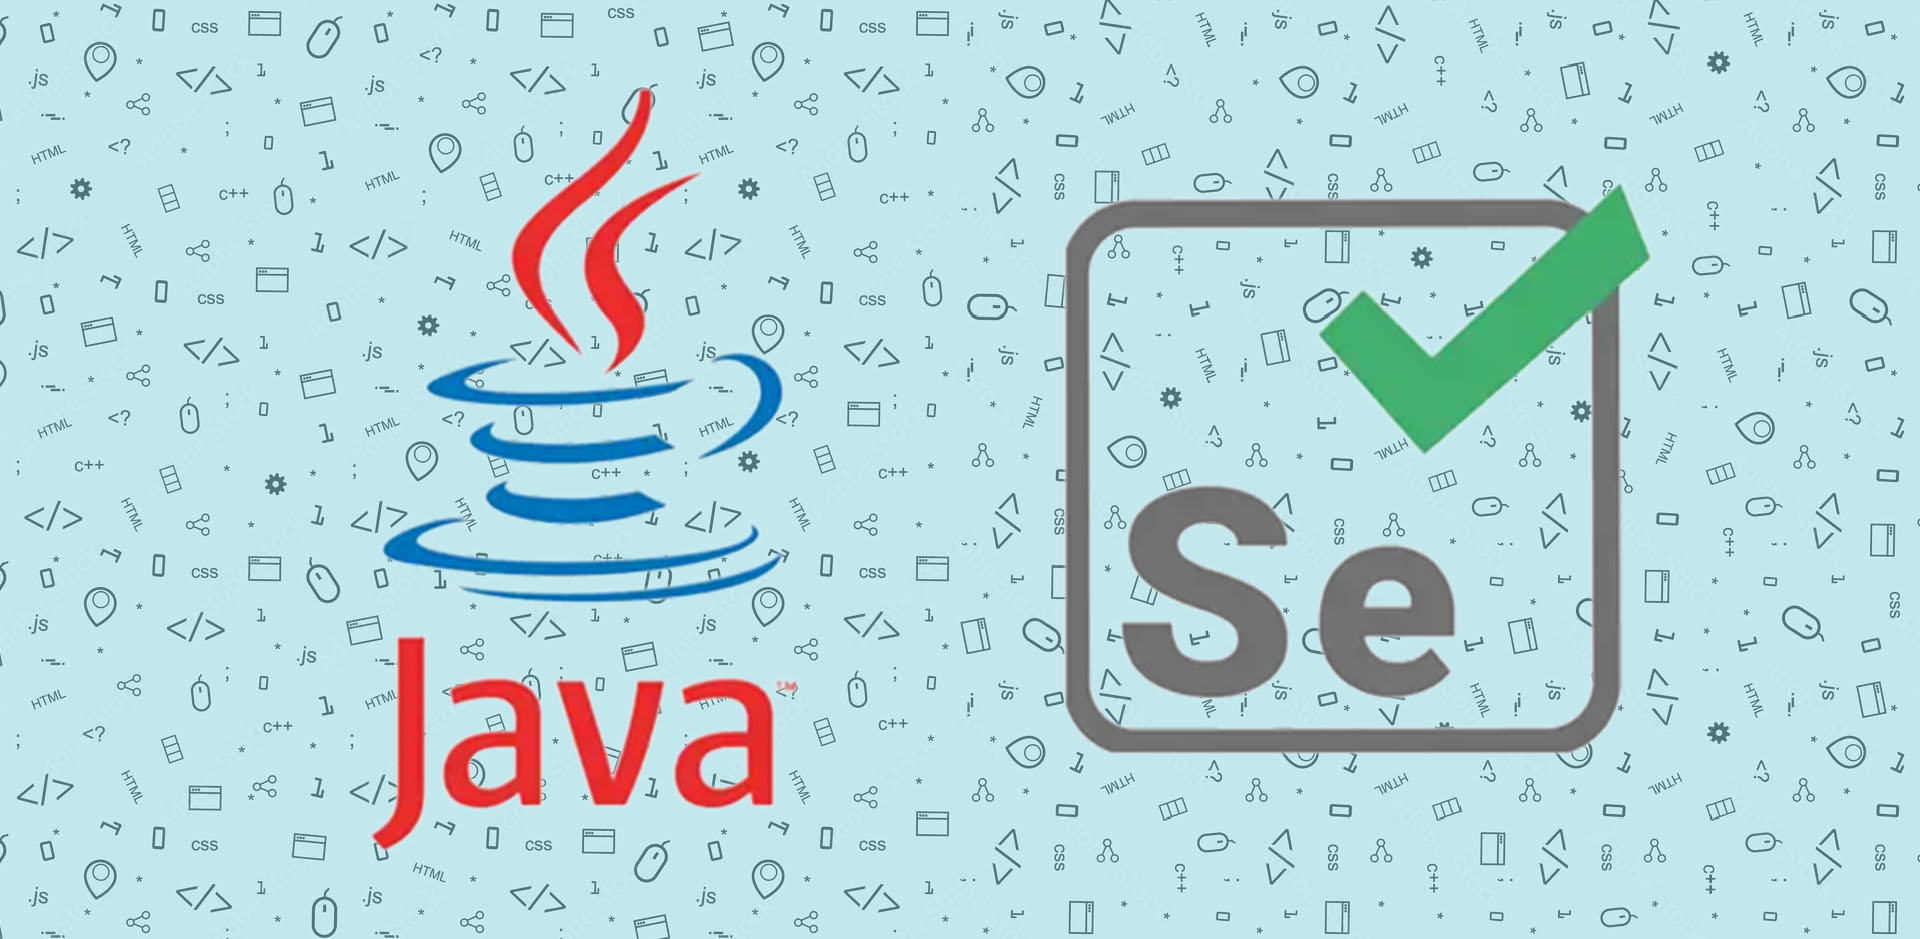 Which has a more successful career, Selenium with Java or Python?